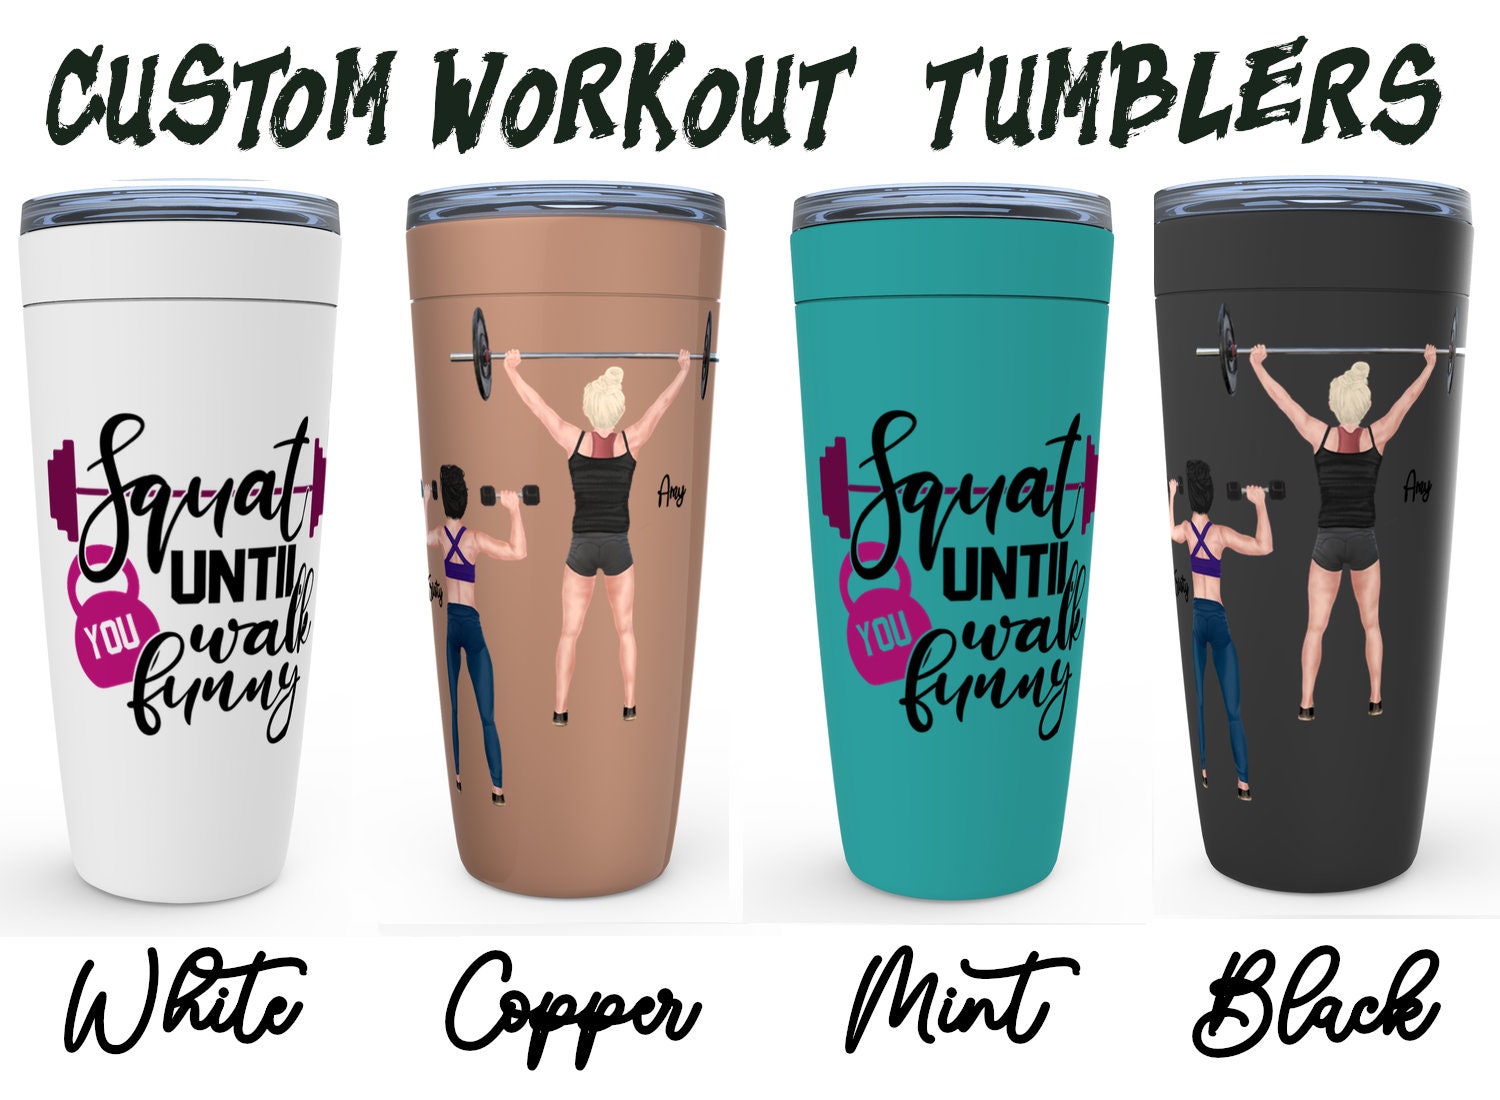 Gym Now Tacos Later - Engraved 10 oz Tumbler Cup Unique Funny Birthday Gift  Graduation Gifts for Men Women Workout Lift Crossfit Exercise Body Building  (10 Ring, Navy 